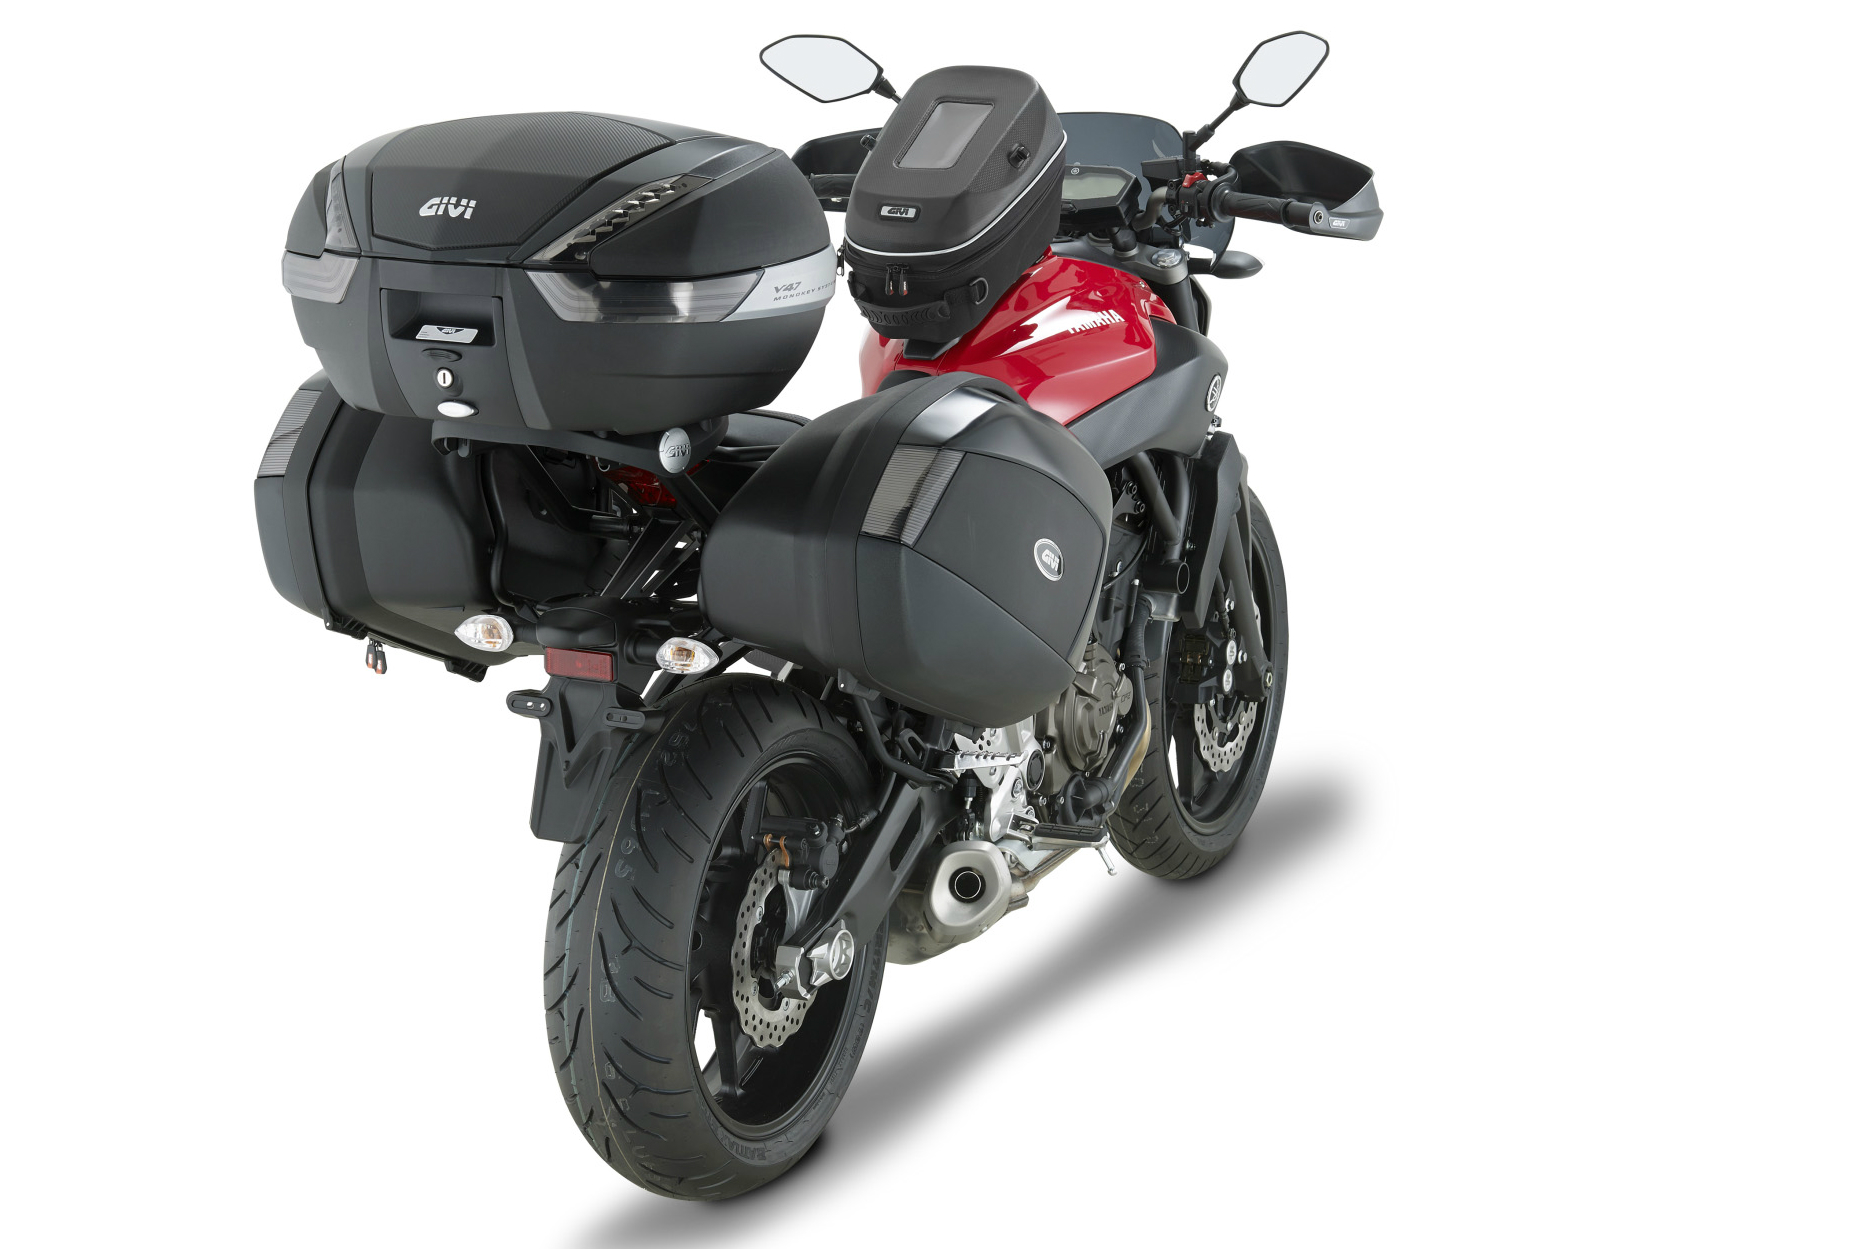 MT-07 gets the touring treatment by Givi